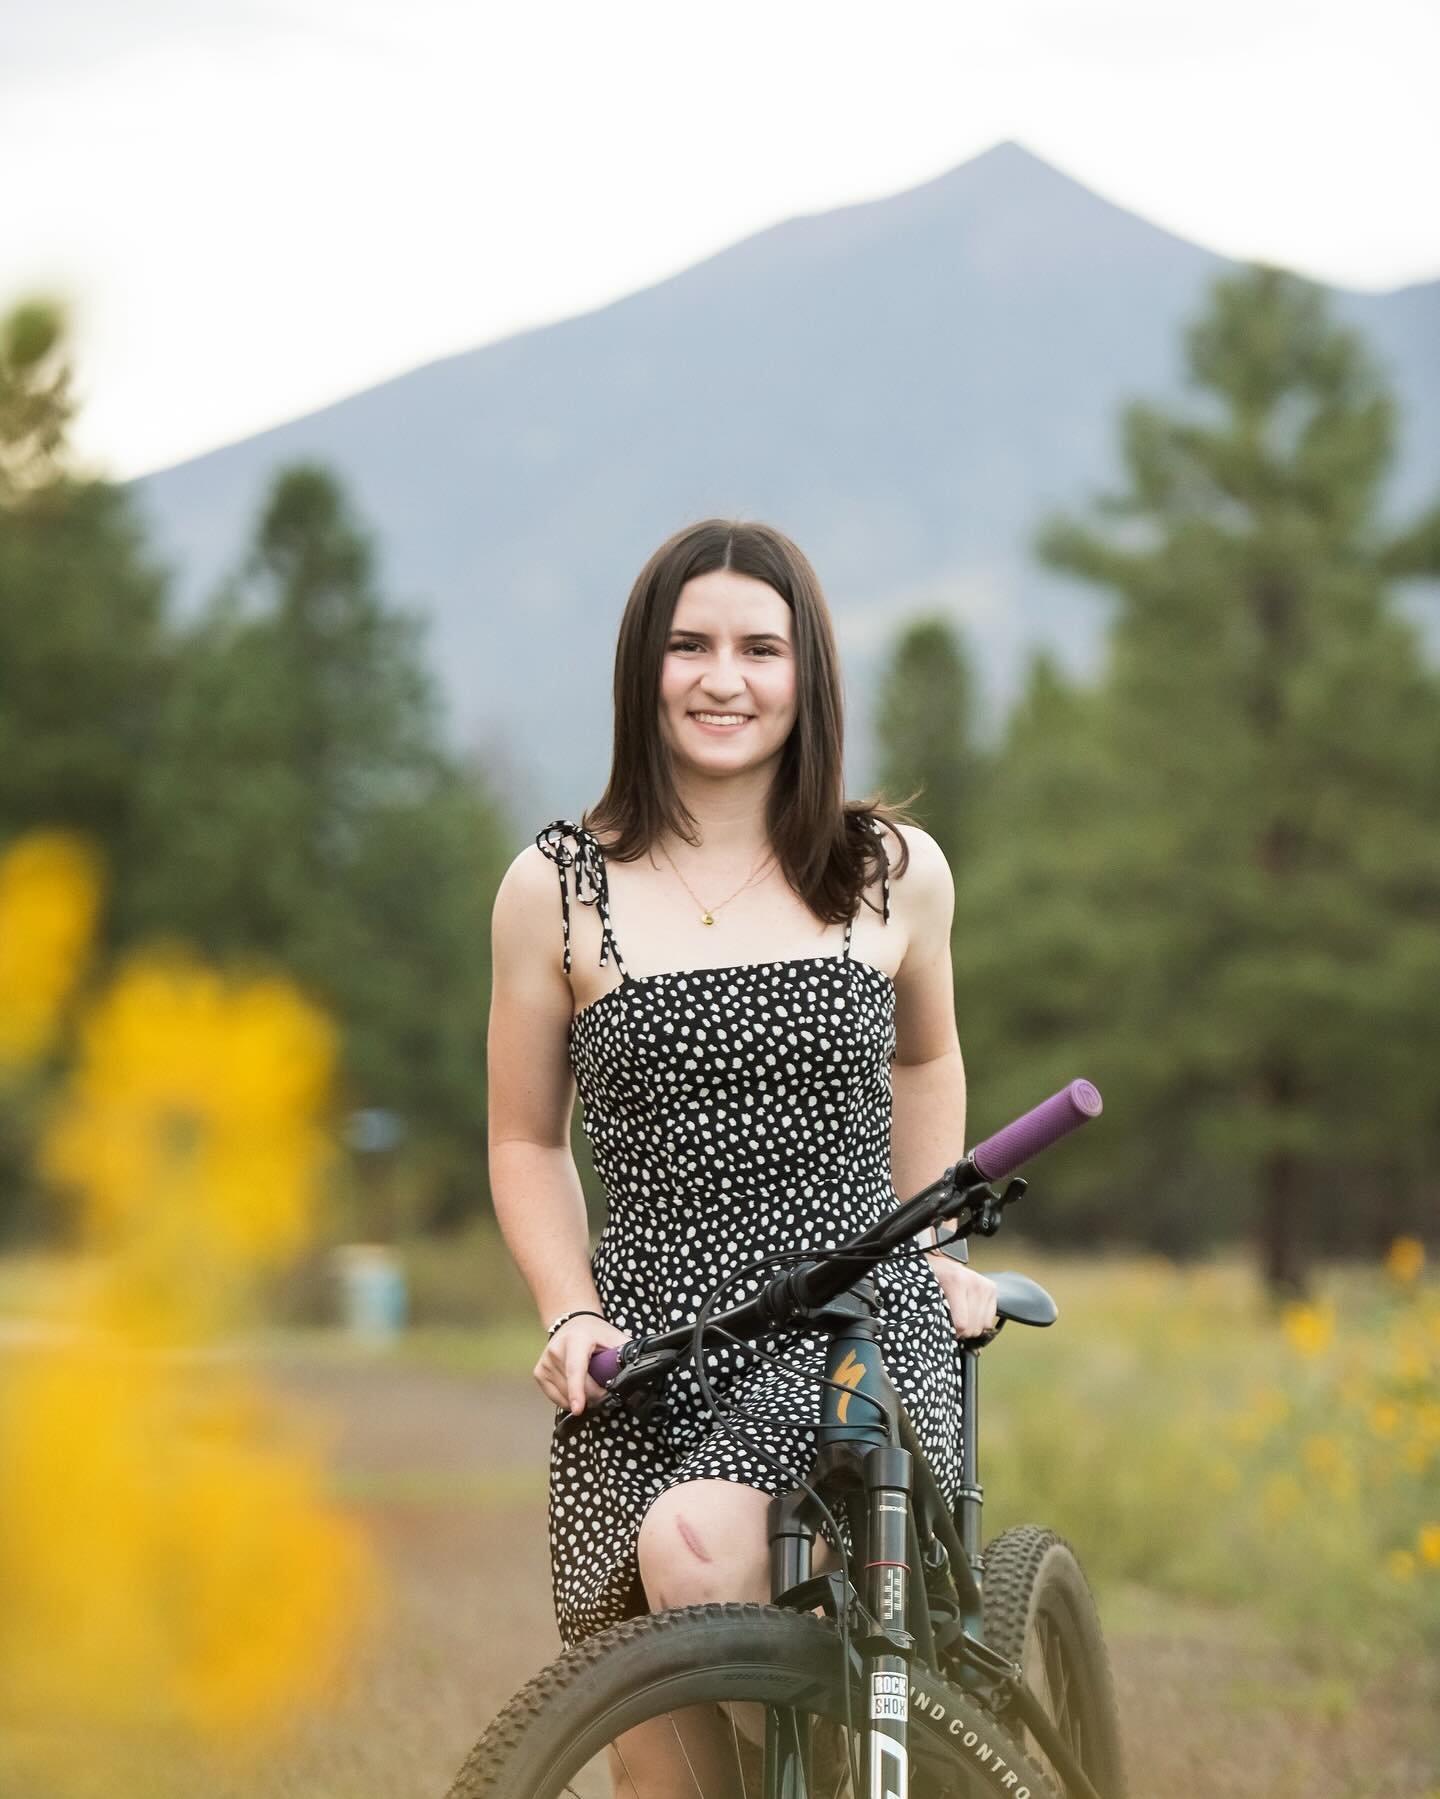 This one does it all! We had a great time with the bike and beautiful late summer flowers. Stay tuned for more including a cool combo of ballet and Oak Creek Canyon! Happy end of senior year 😍